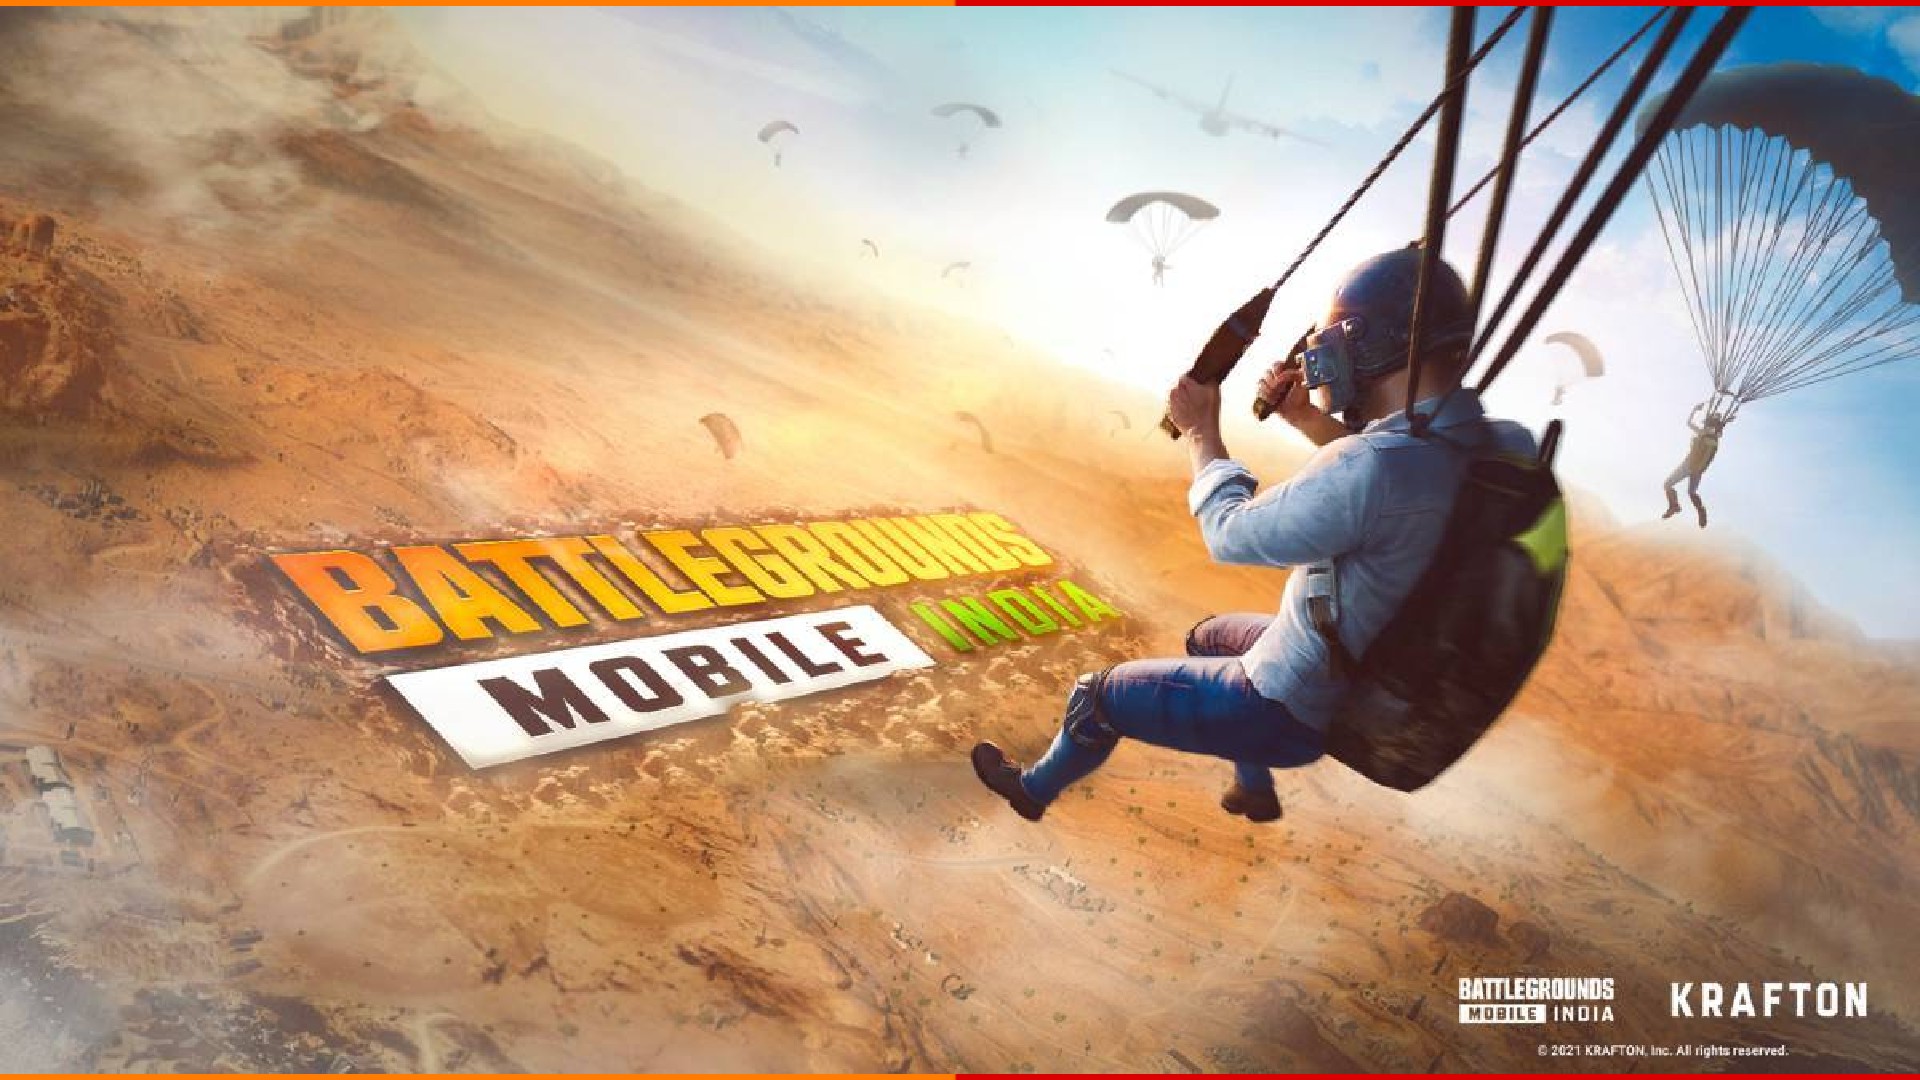 A Crackdown Is Underway By Battlegrounds Mobile India Against Cheaters: The Devices Will Be Permanently Banned!